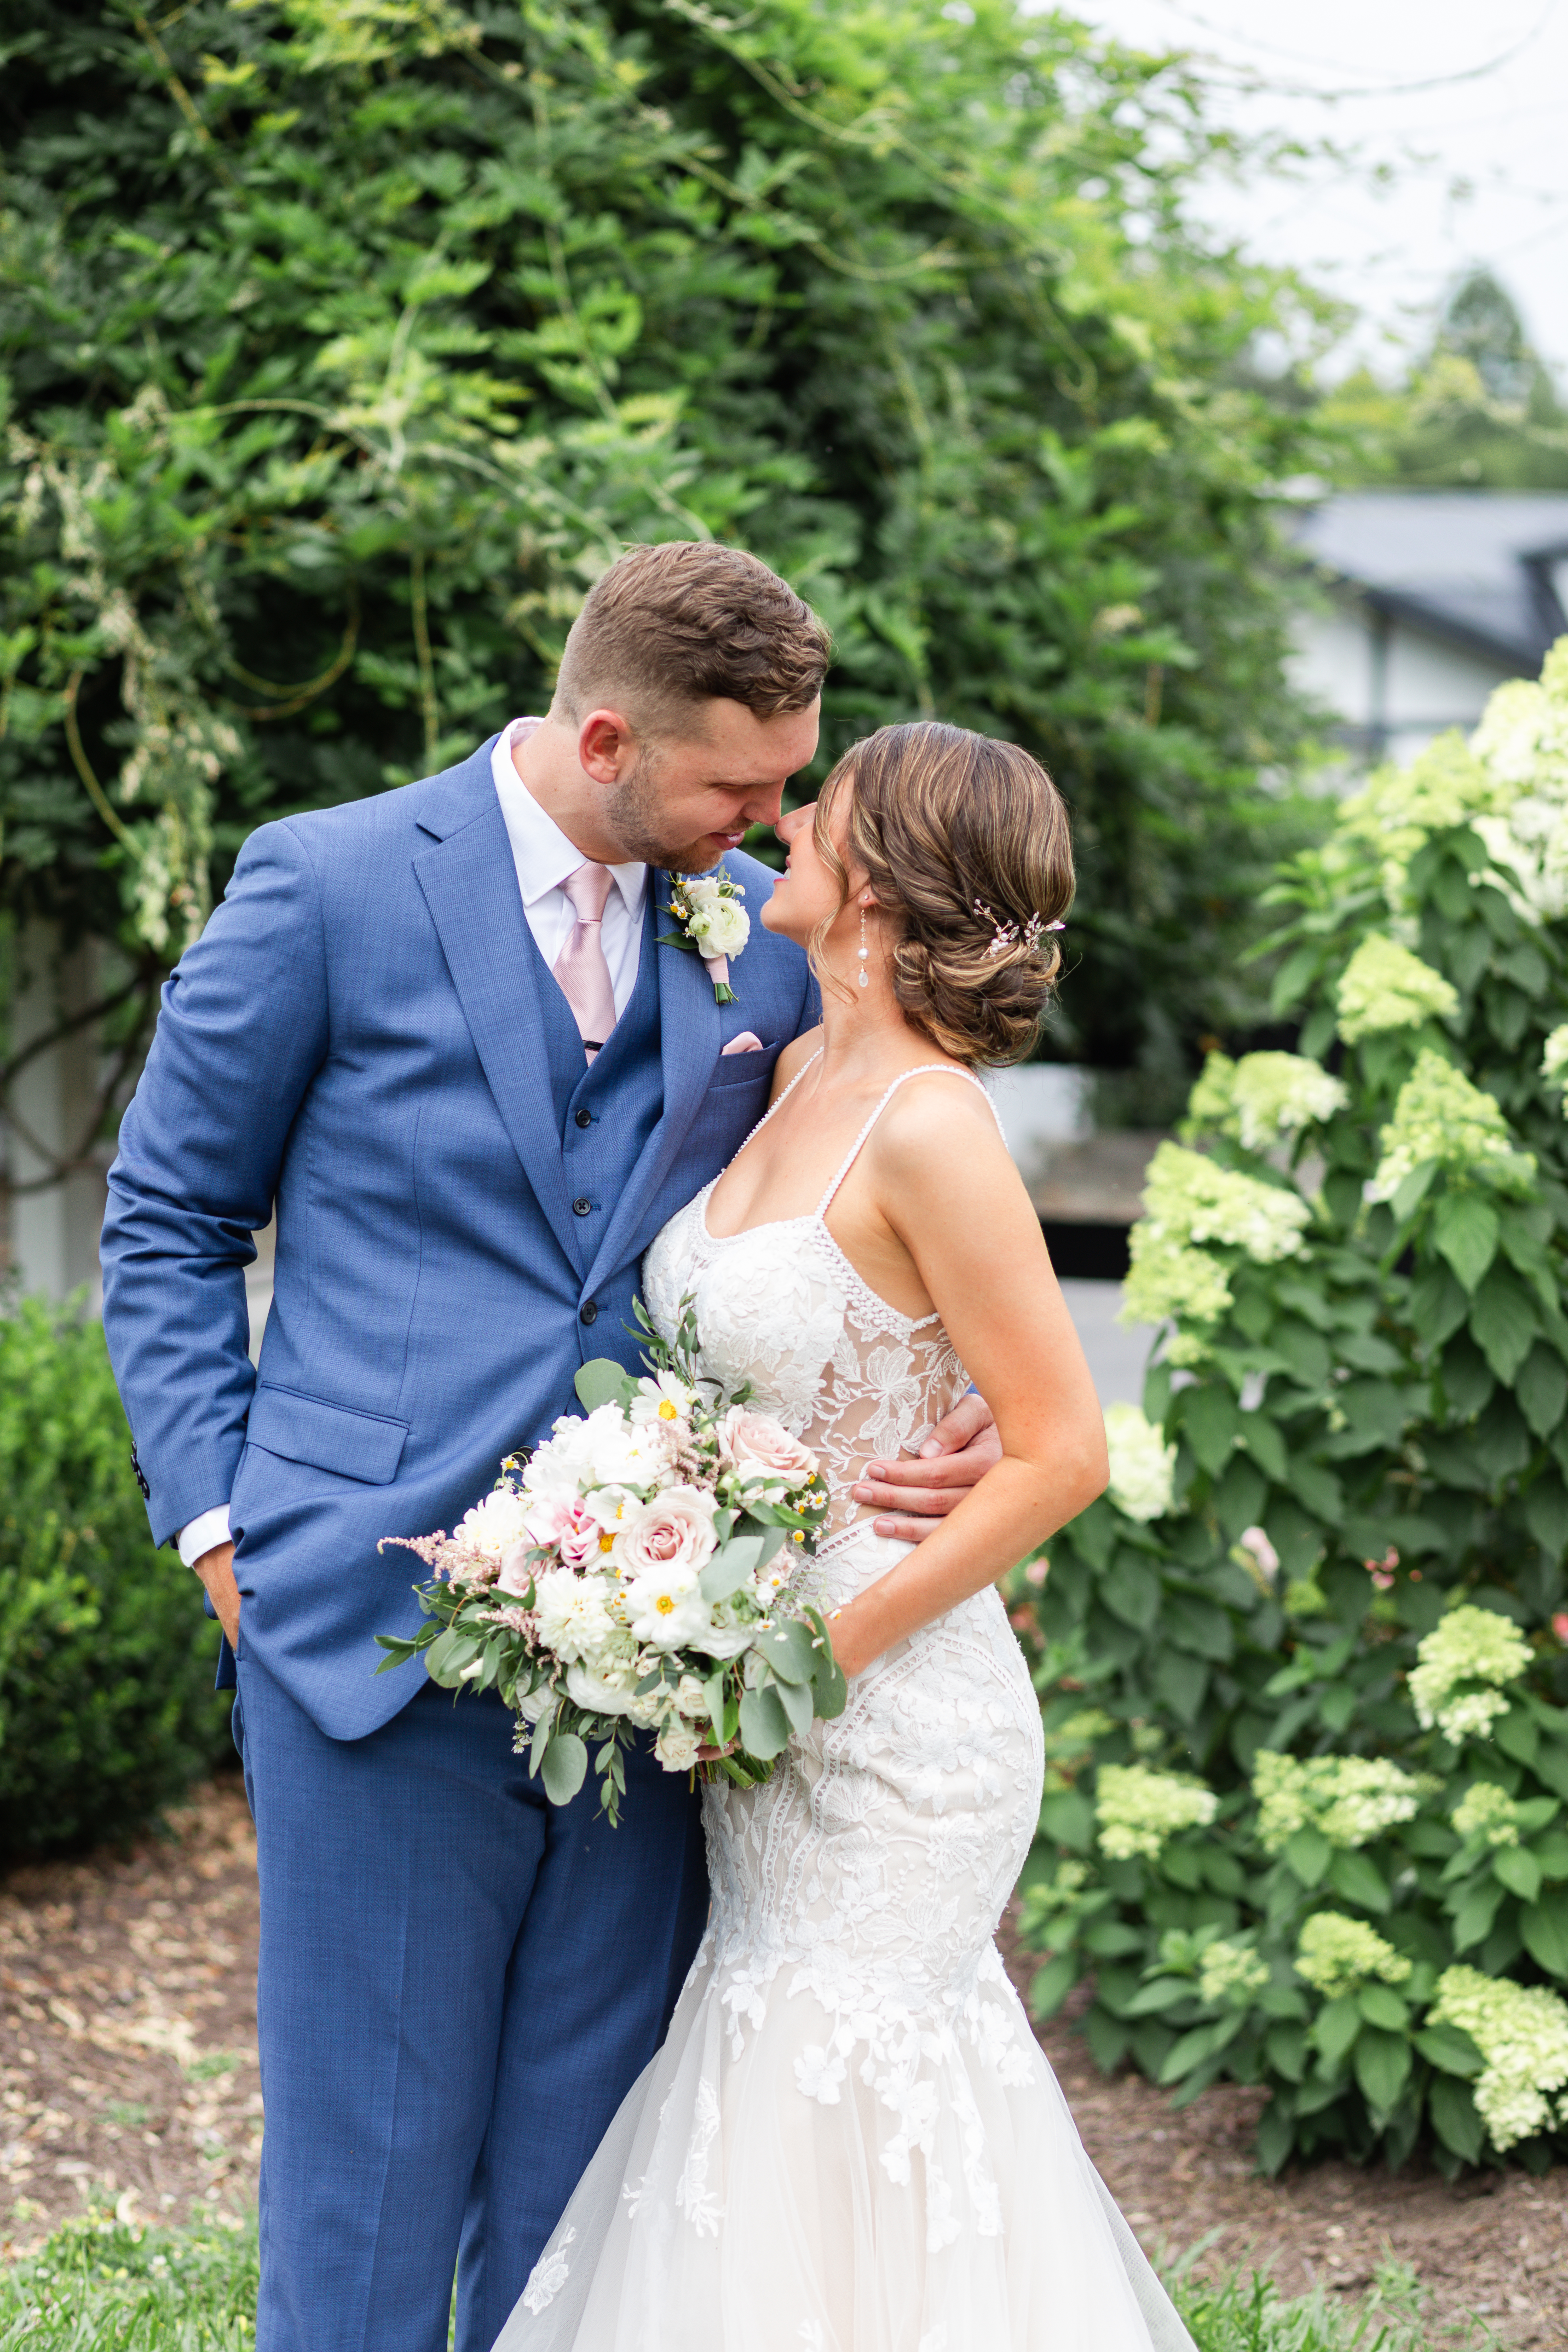 newlyweds embrace in the gardens at Altria Farm during their romantic barn wedding